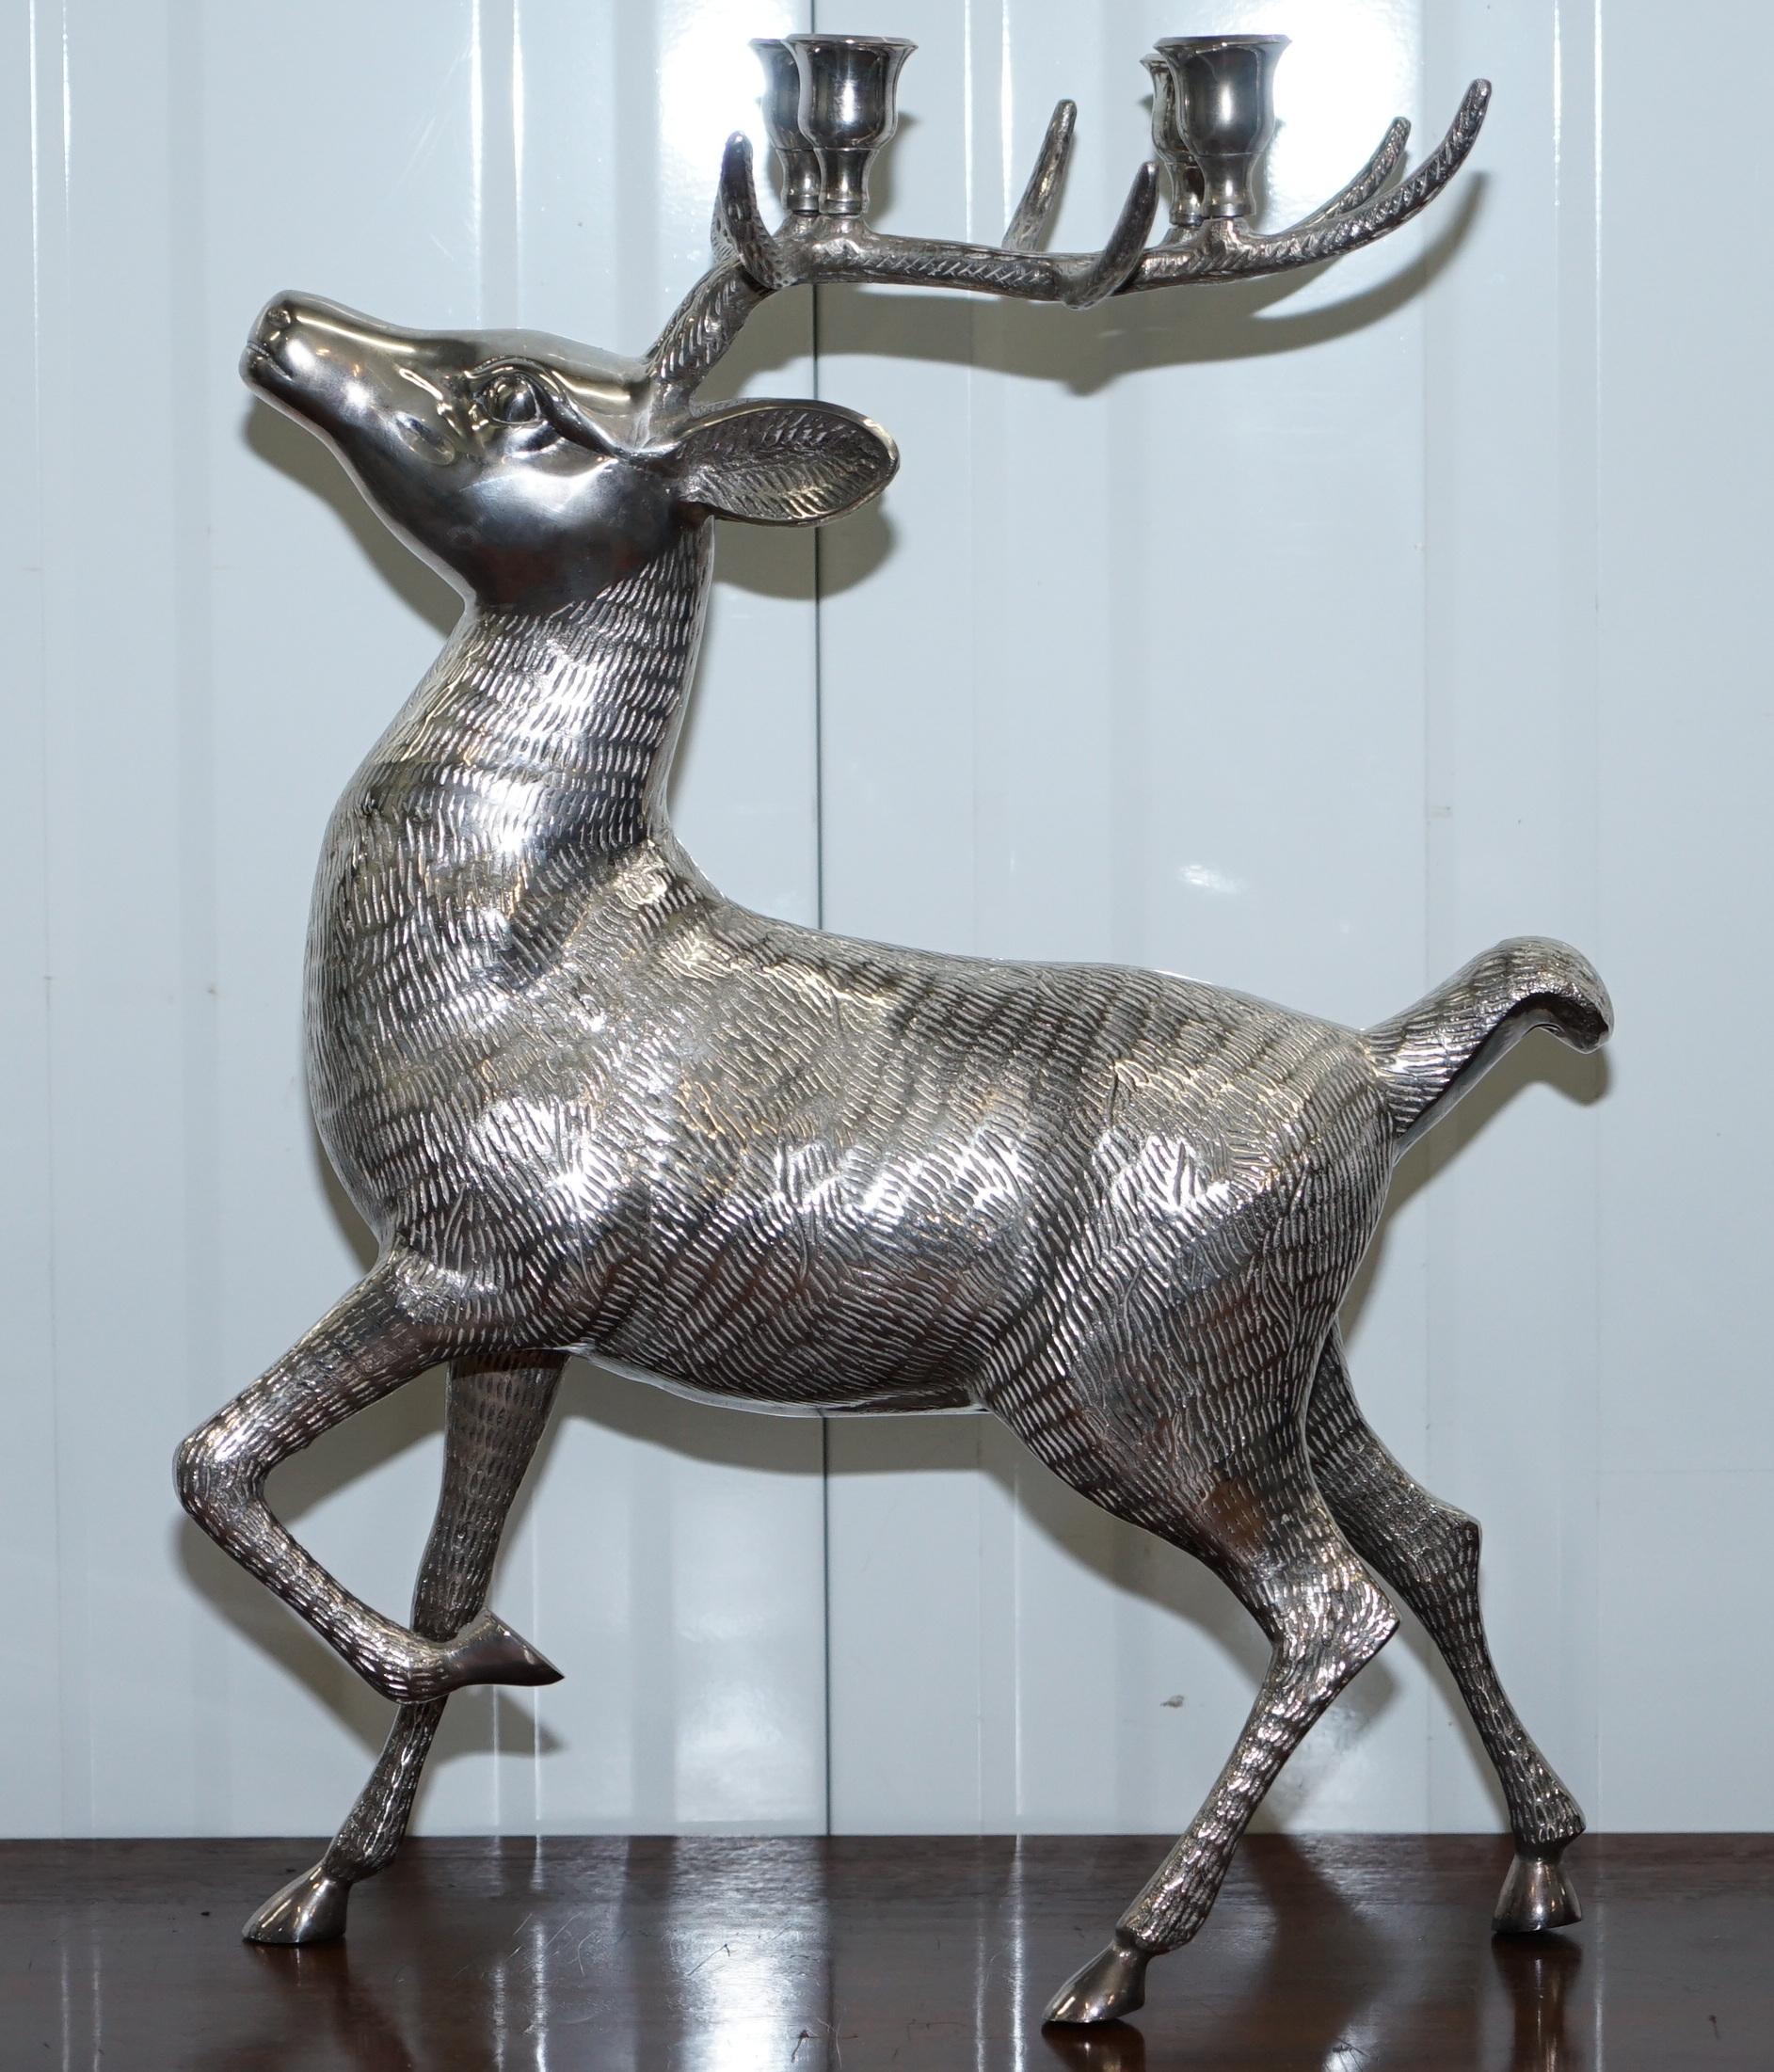 We are delighted to offer for sale this very nicely cast silver plated candlestick holder centrepiece of a Reindeer

I’ve seen a lot of basic versions of these over the years but never one as fine as this, the detail is exquisite as is the